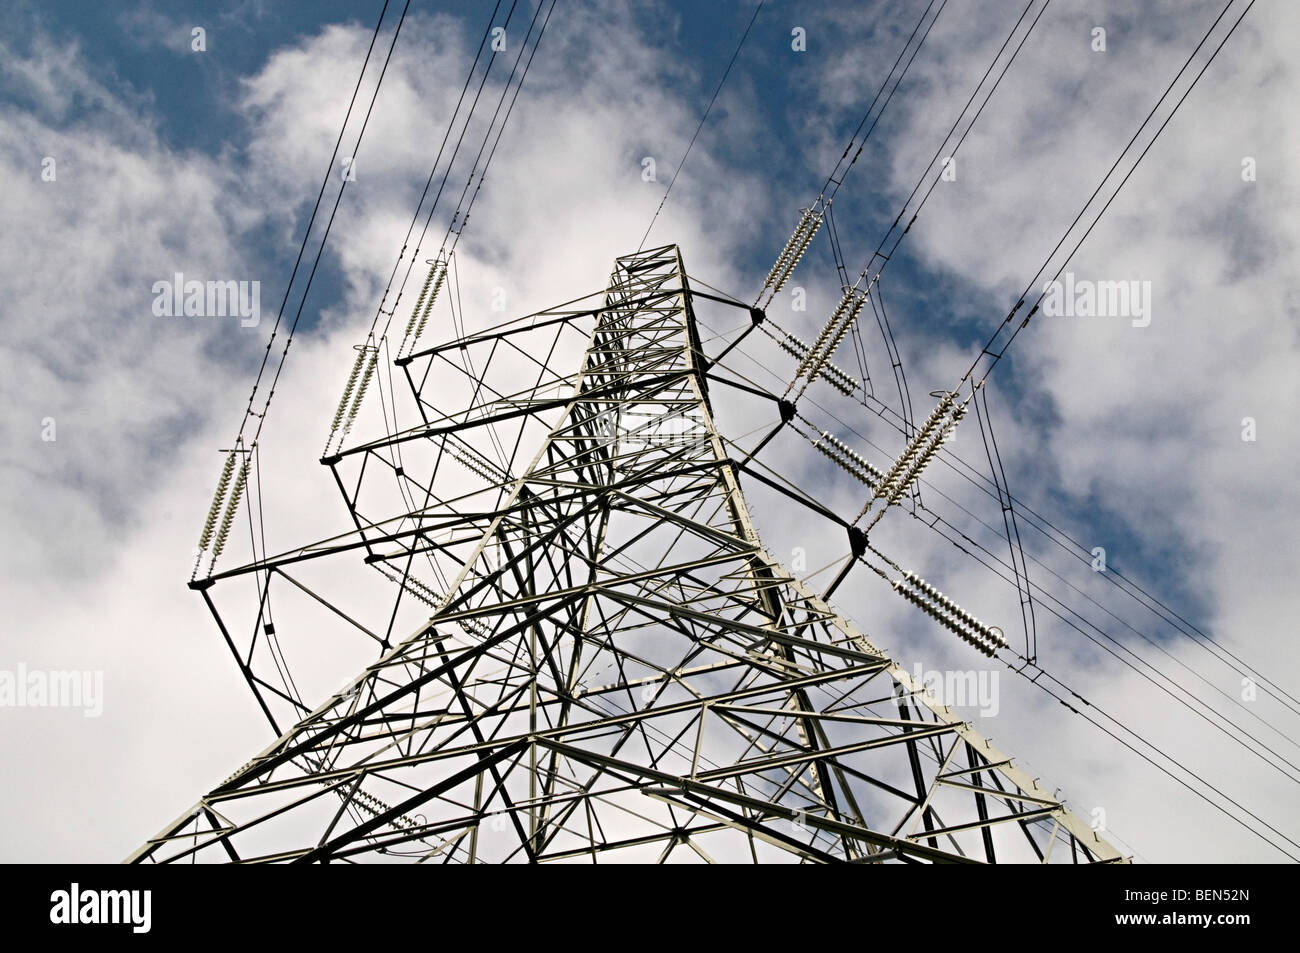 electricity pylon used to transmit power across the countryside Stock Photo